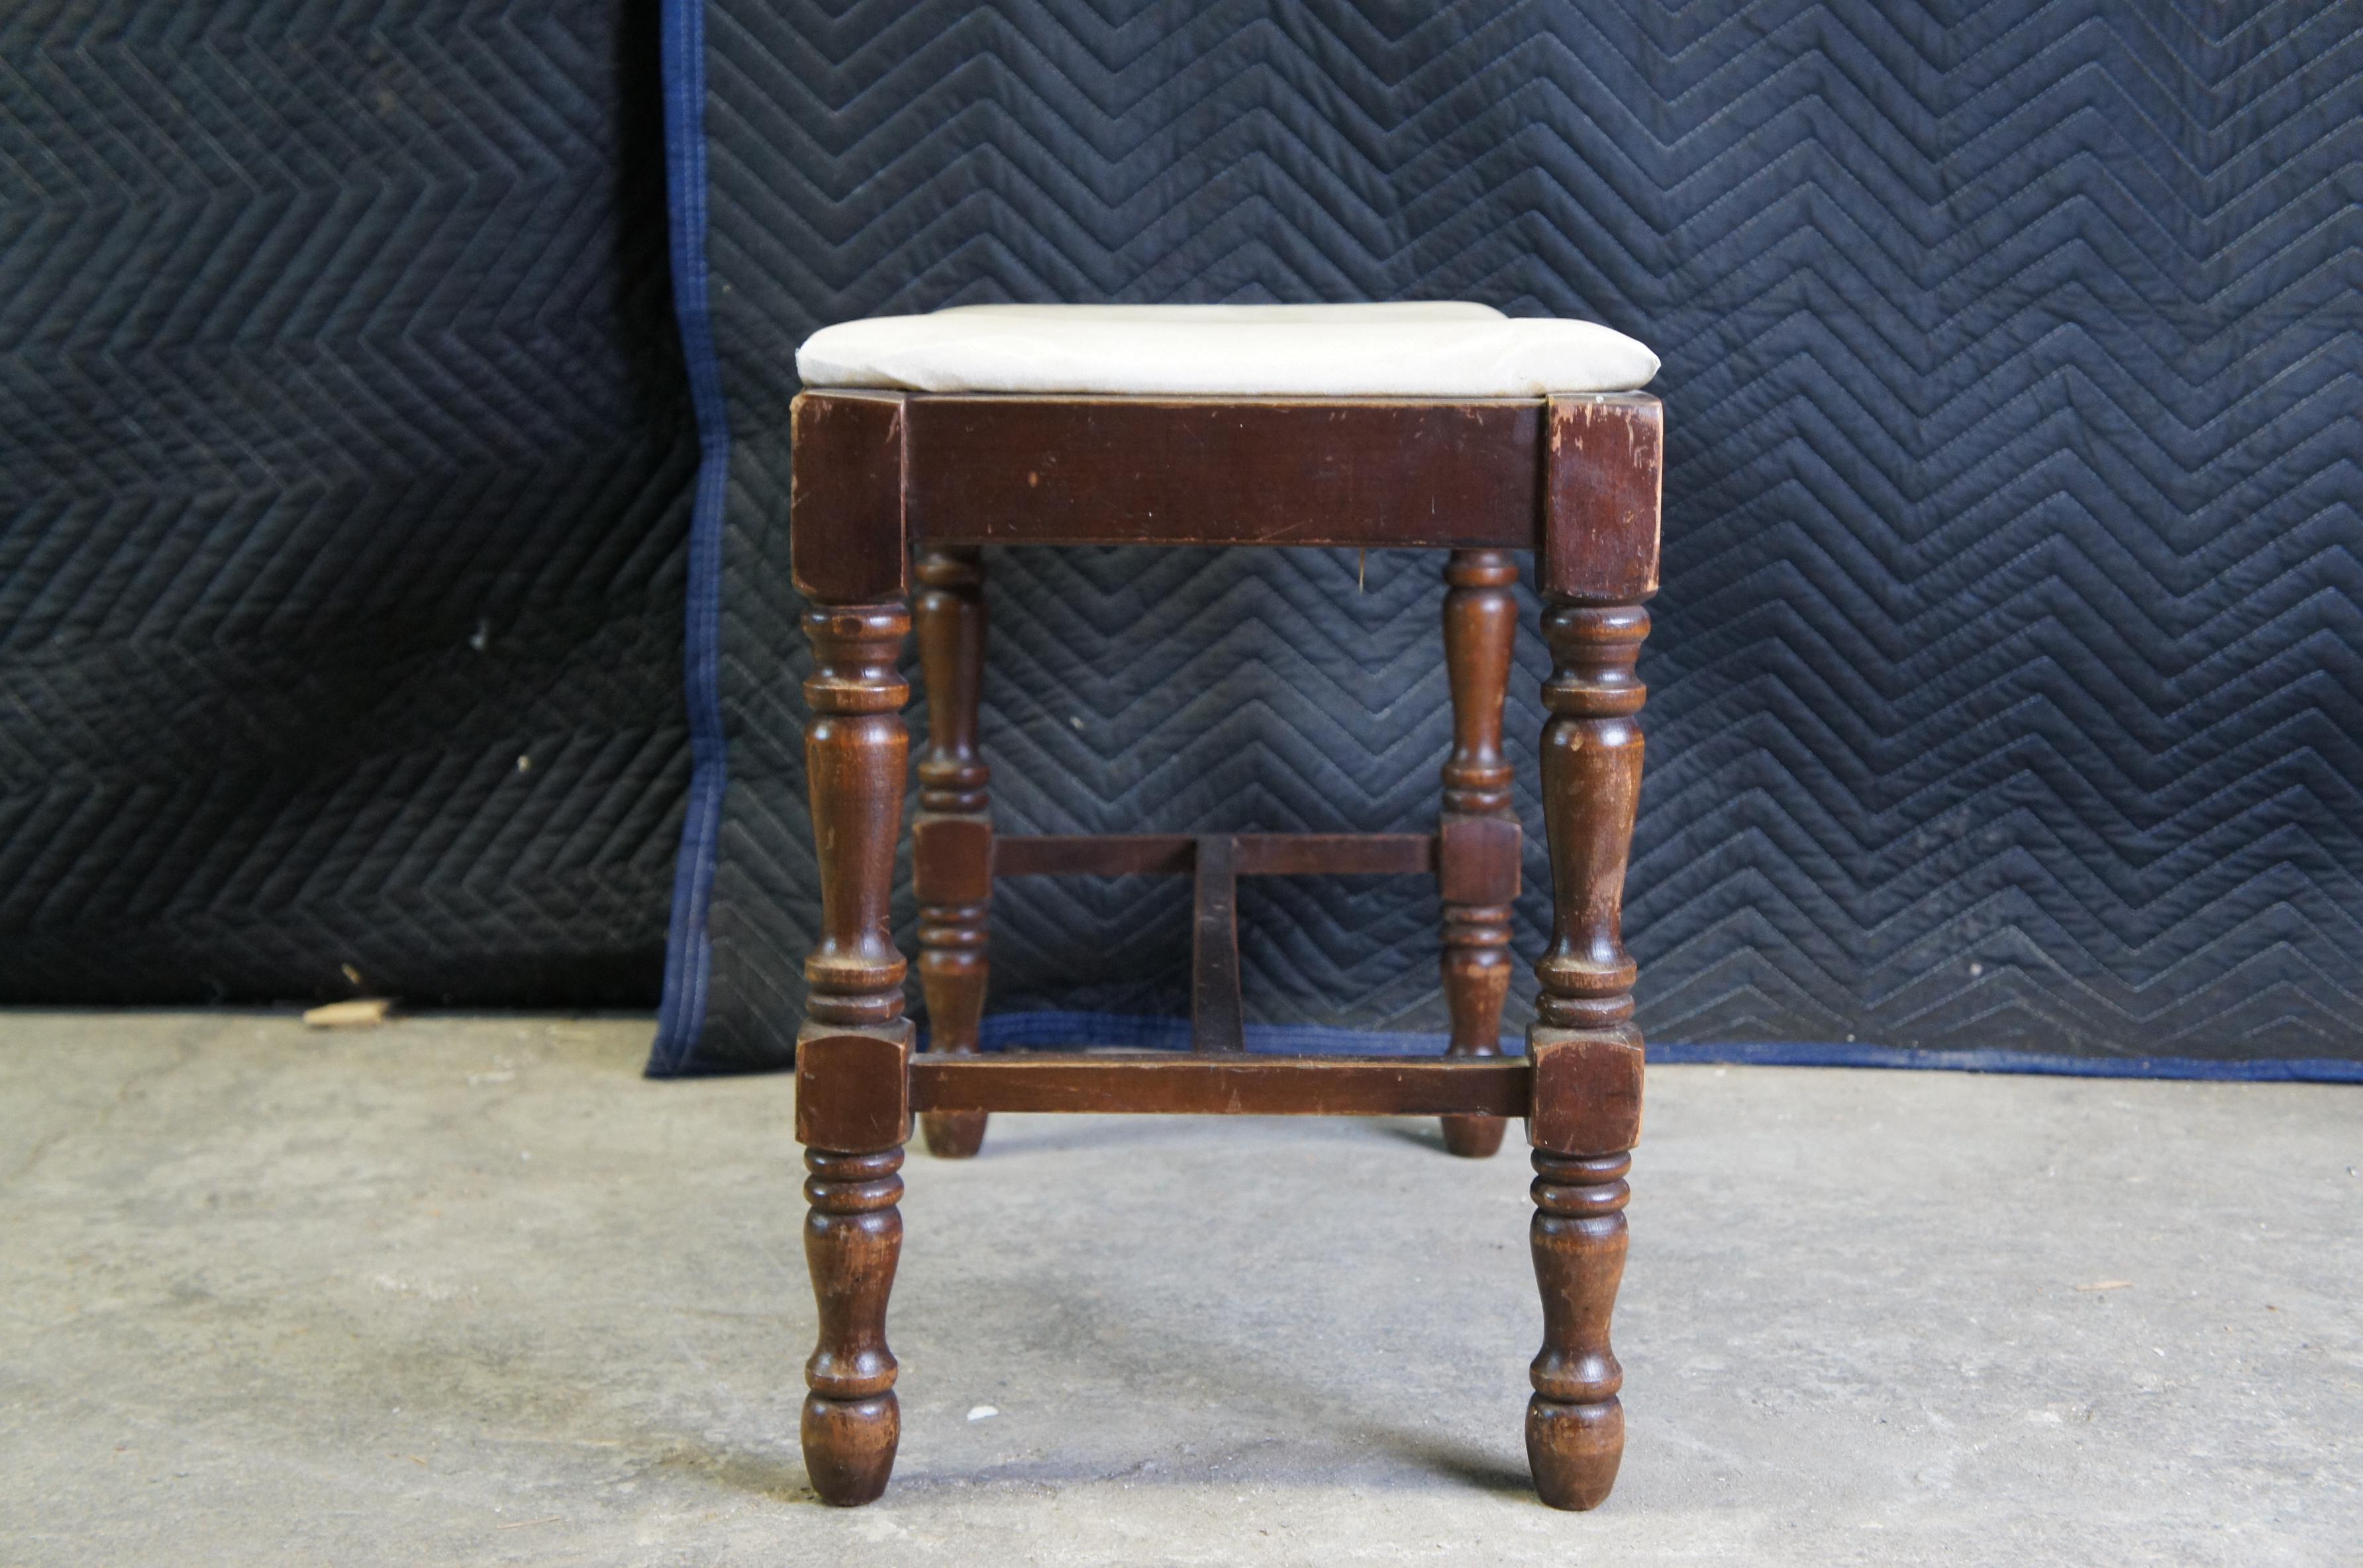 20th Century Antique William and Mary Style Walnut Stool Ottoman Foot Rest Piano Bench